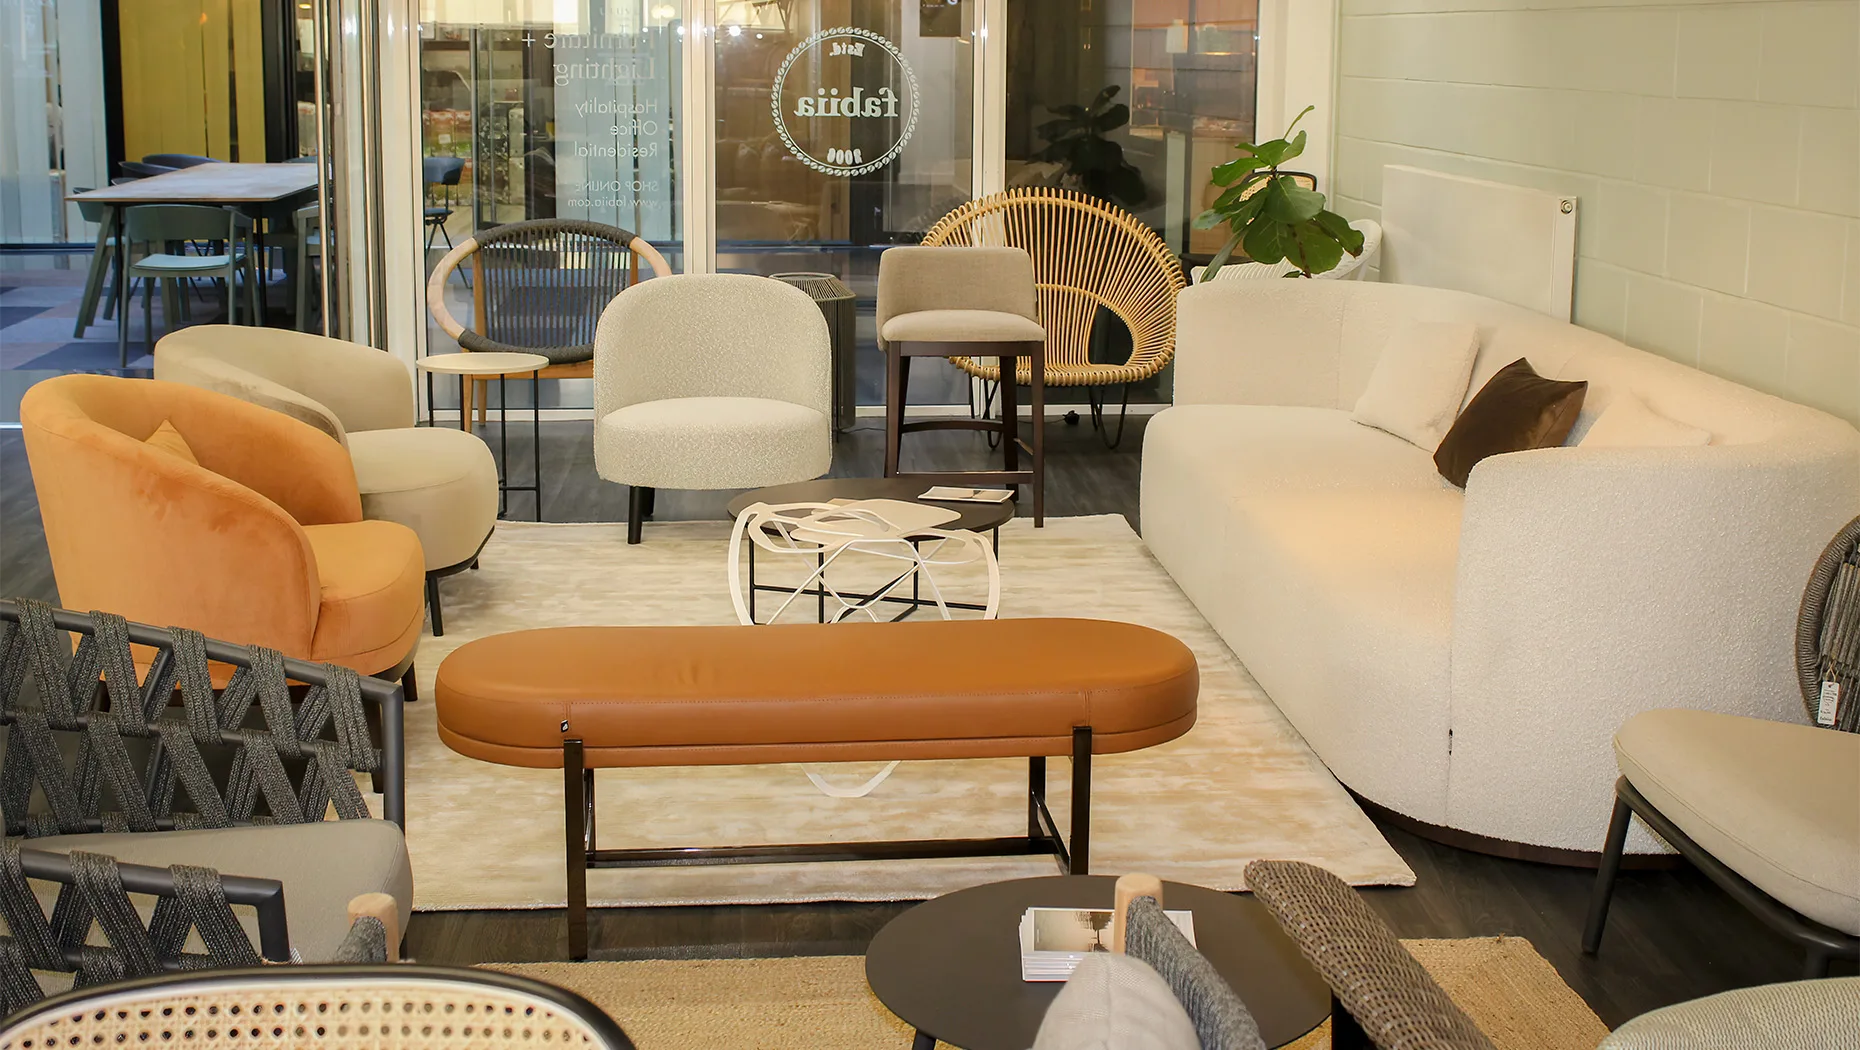 fabiia showroom interiors consisting of plush upholstered armchairs and sofas